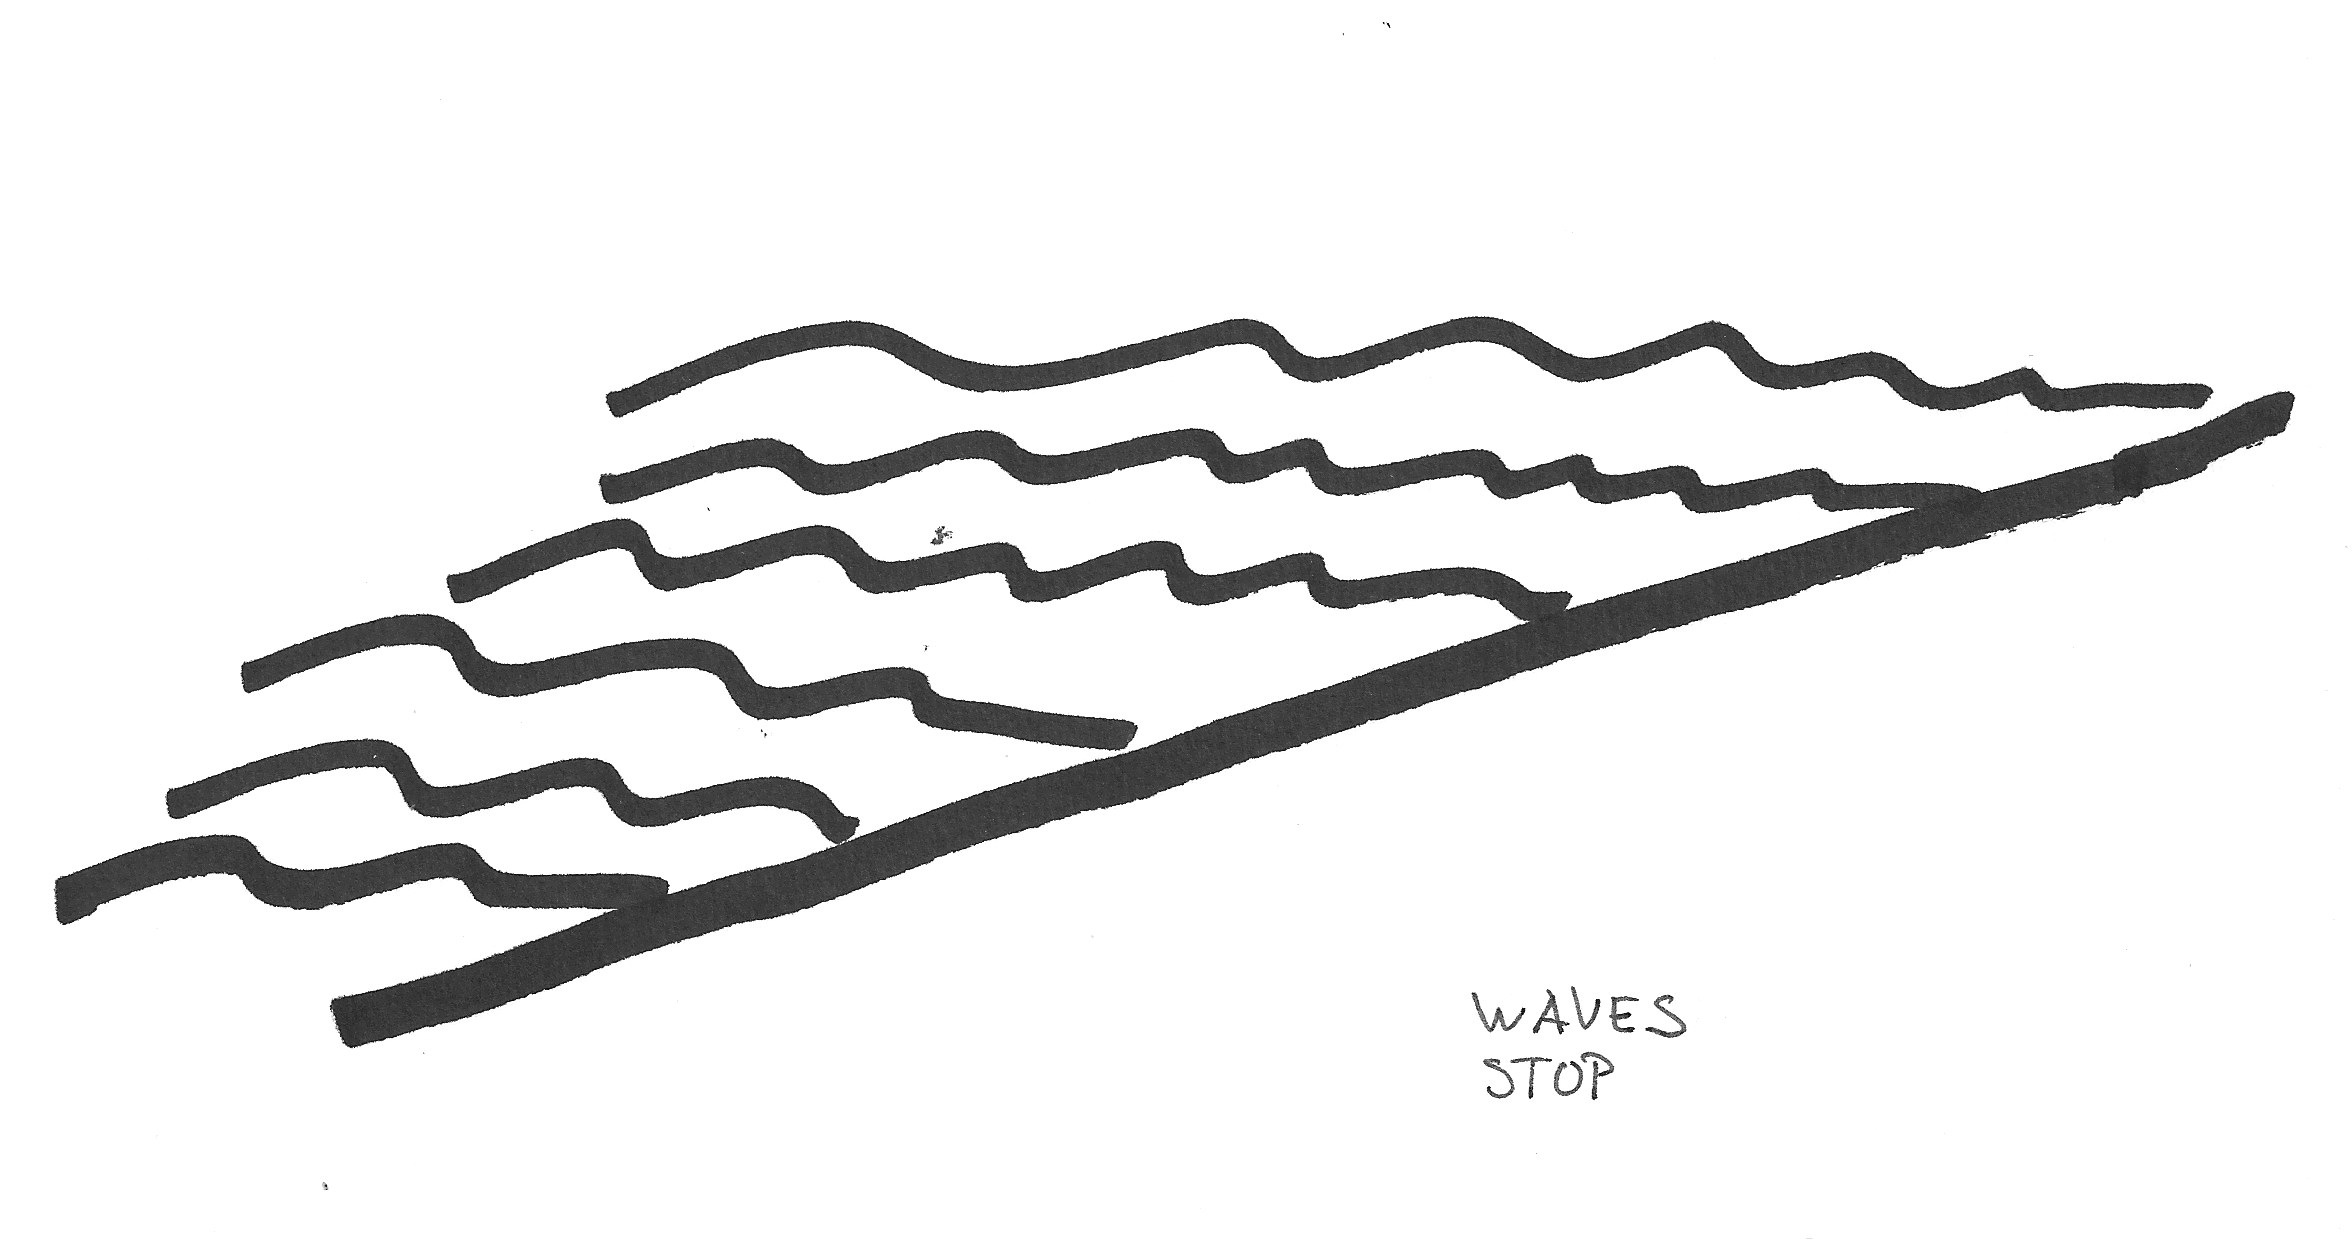 Ocean waves clipart black and white 